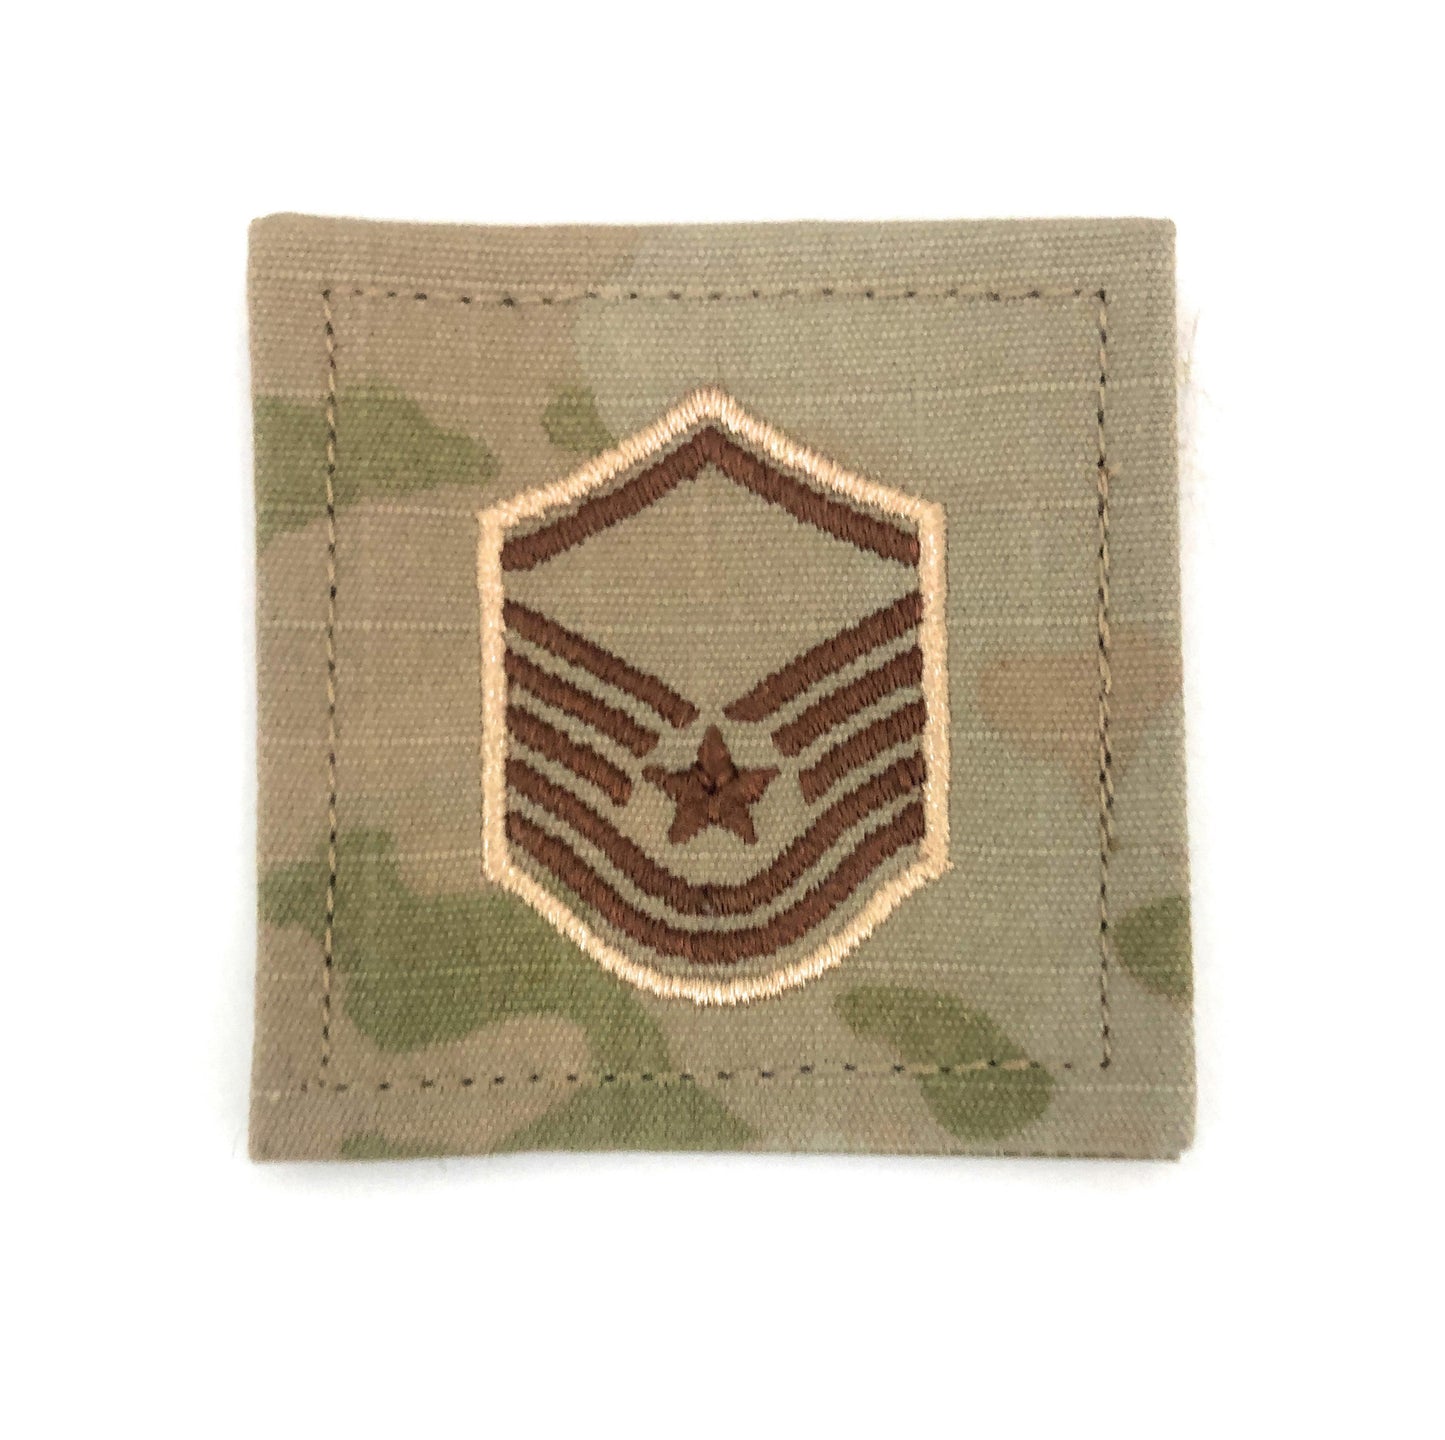 U.S. Air Force E7 Master Sergeant OCP Spice Brown with Hook Fastener